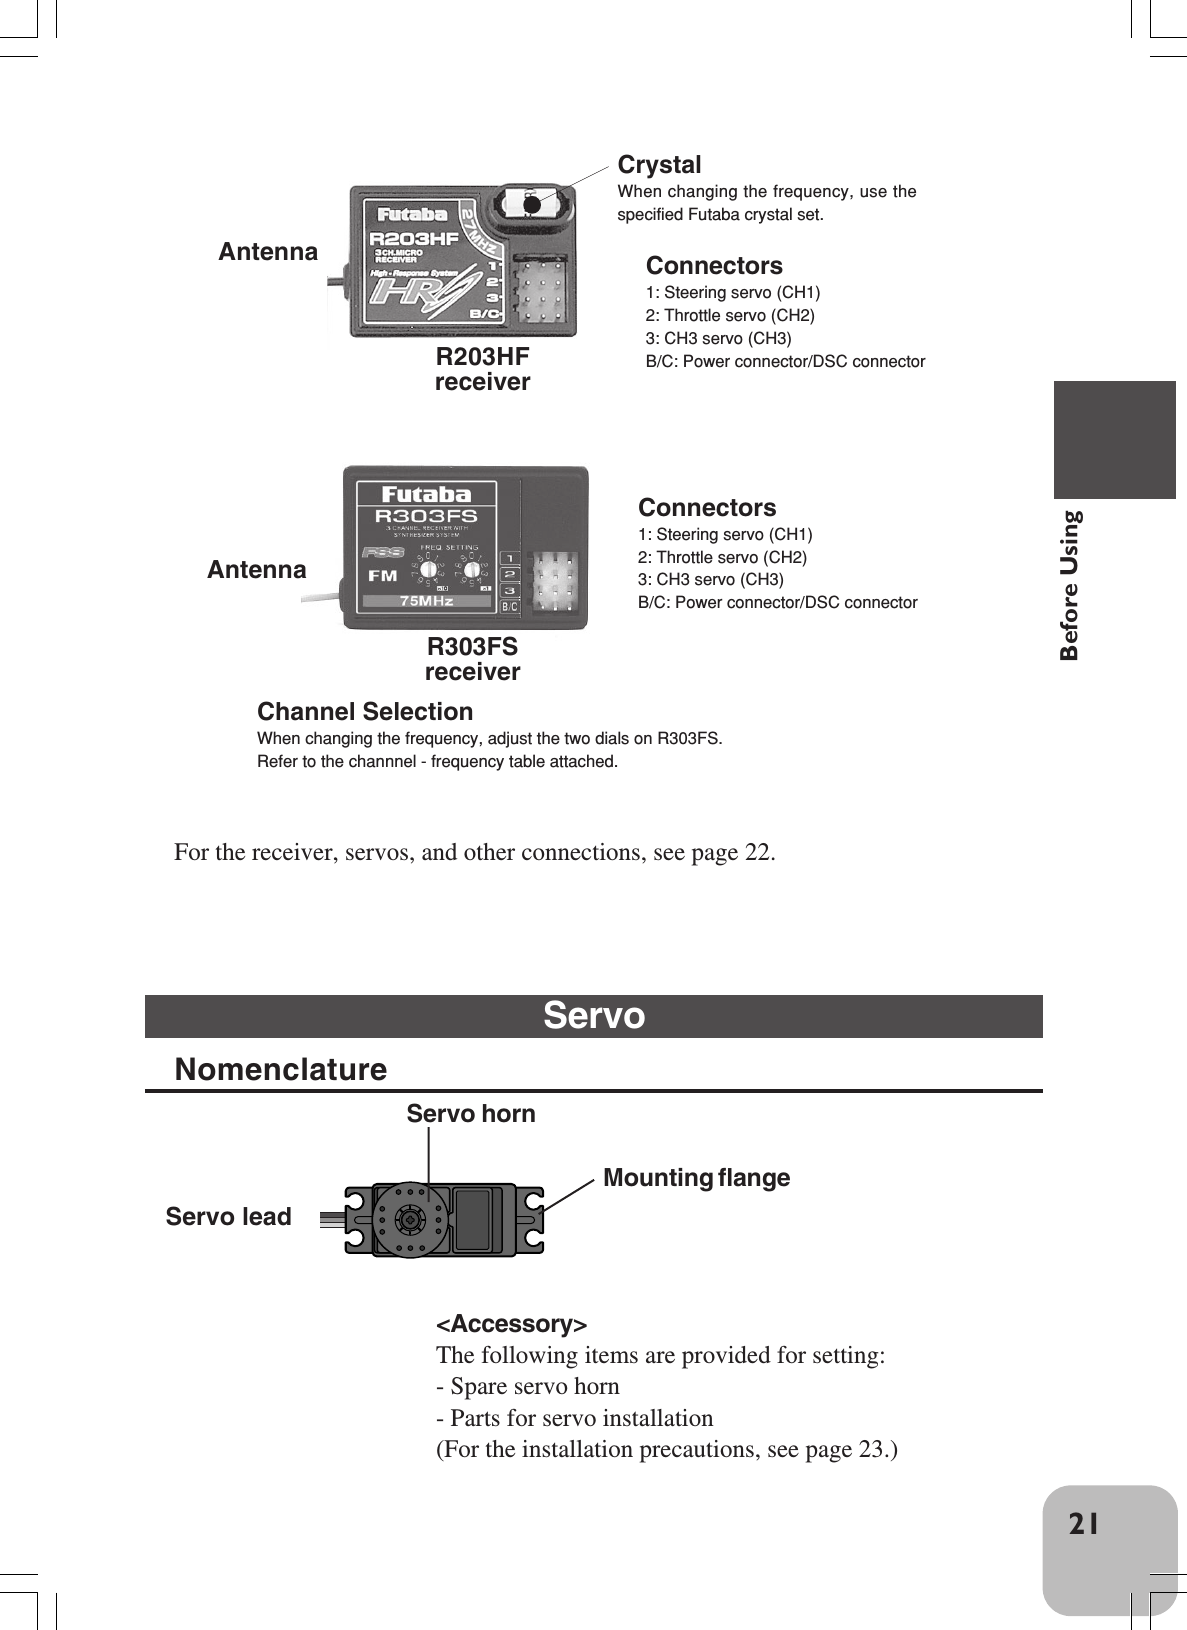 21Before UsingConnectors1: Steering servo (CH1)2: Throttle servo (CH2)3: CH3 servo (CH3)B/C: Power connector/DSC connectorR303FSreceiverFor the receiver, servos, and other connections, see page 22.Servo leadServo hornMounting flange&lt;Accessory&gt;The following items are provided for setting:- Spare servo horn- Parts for servo installation(For the installation precautions, see page 23.)CrystalWhen changing the frequency, use thespecified Futaba crystal set.Antenna Connectors1: Steering servo (CH1)2: Throttle servo (CH2)3: CH3 servo (CH3)B/C: Power connector/DSC connectorR203HFreceiverServoNomenclatureAntennaChannel SelectionWhen changing the frequency, adjust the two dials on R303FS.Refer to the channnel - frequency table attached.